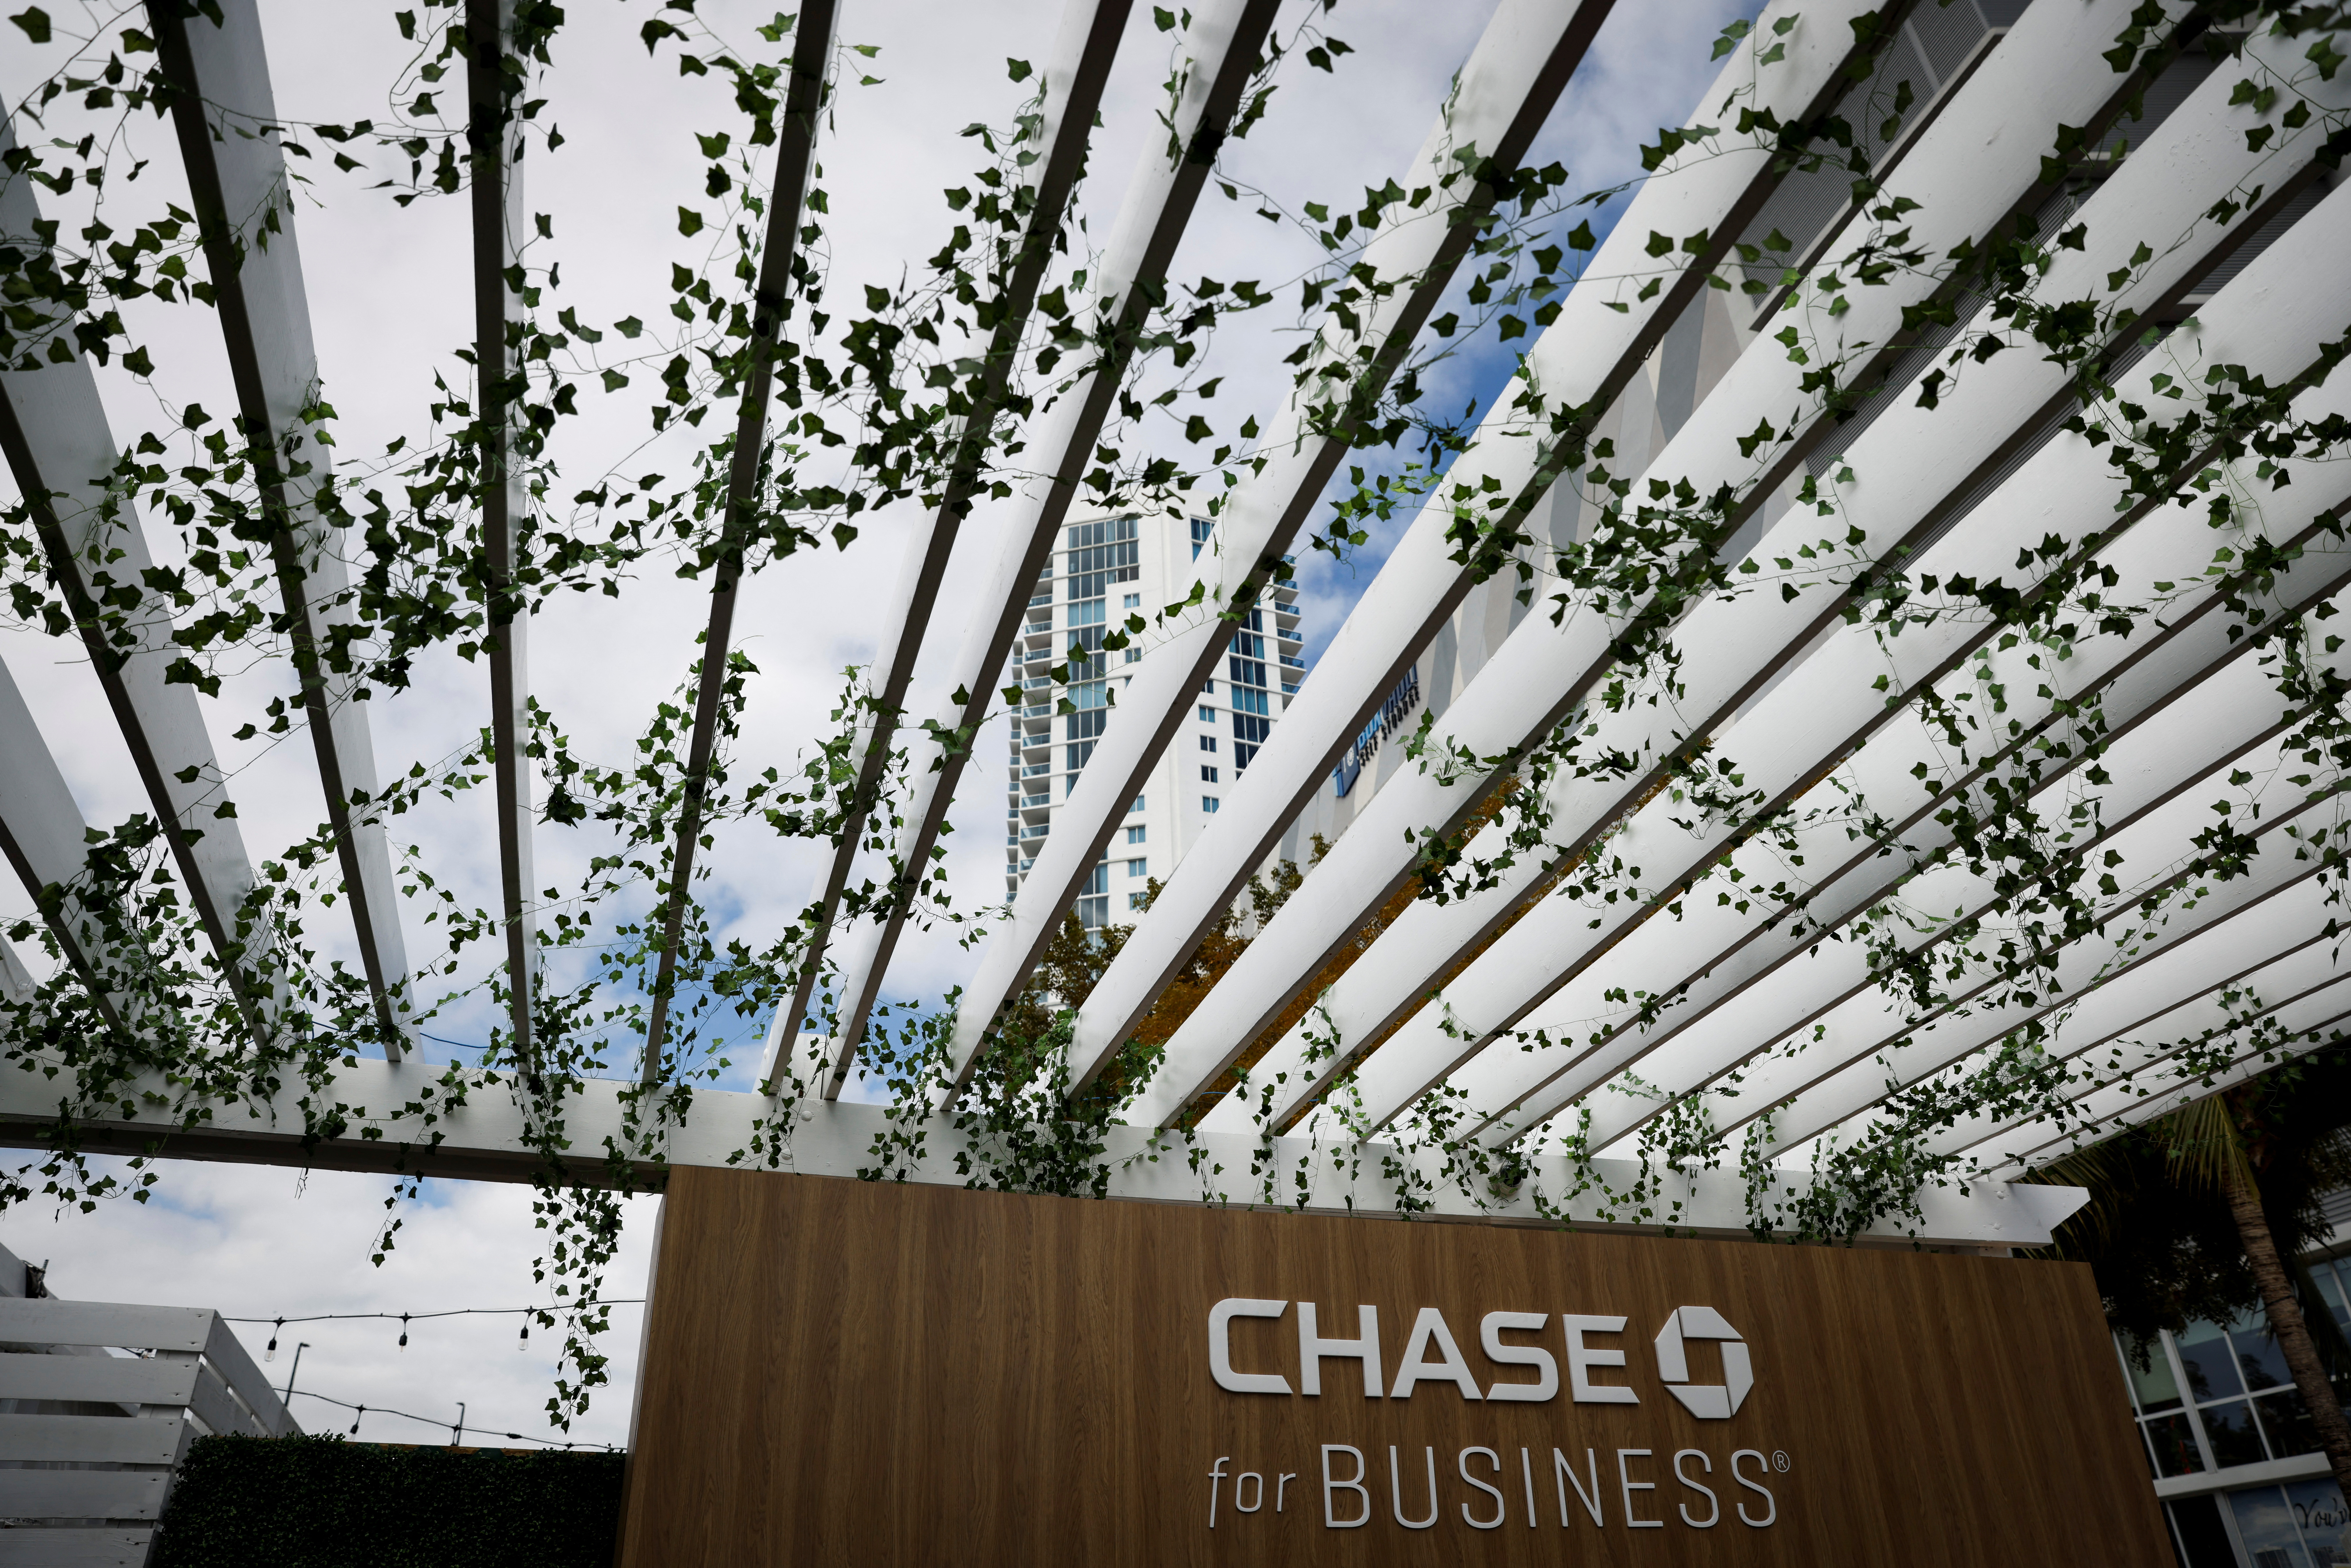 Chase for Business event for small business owners in Miami